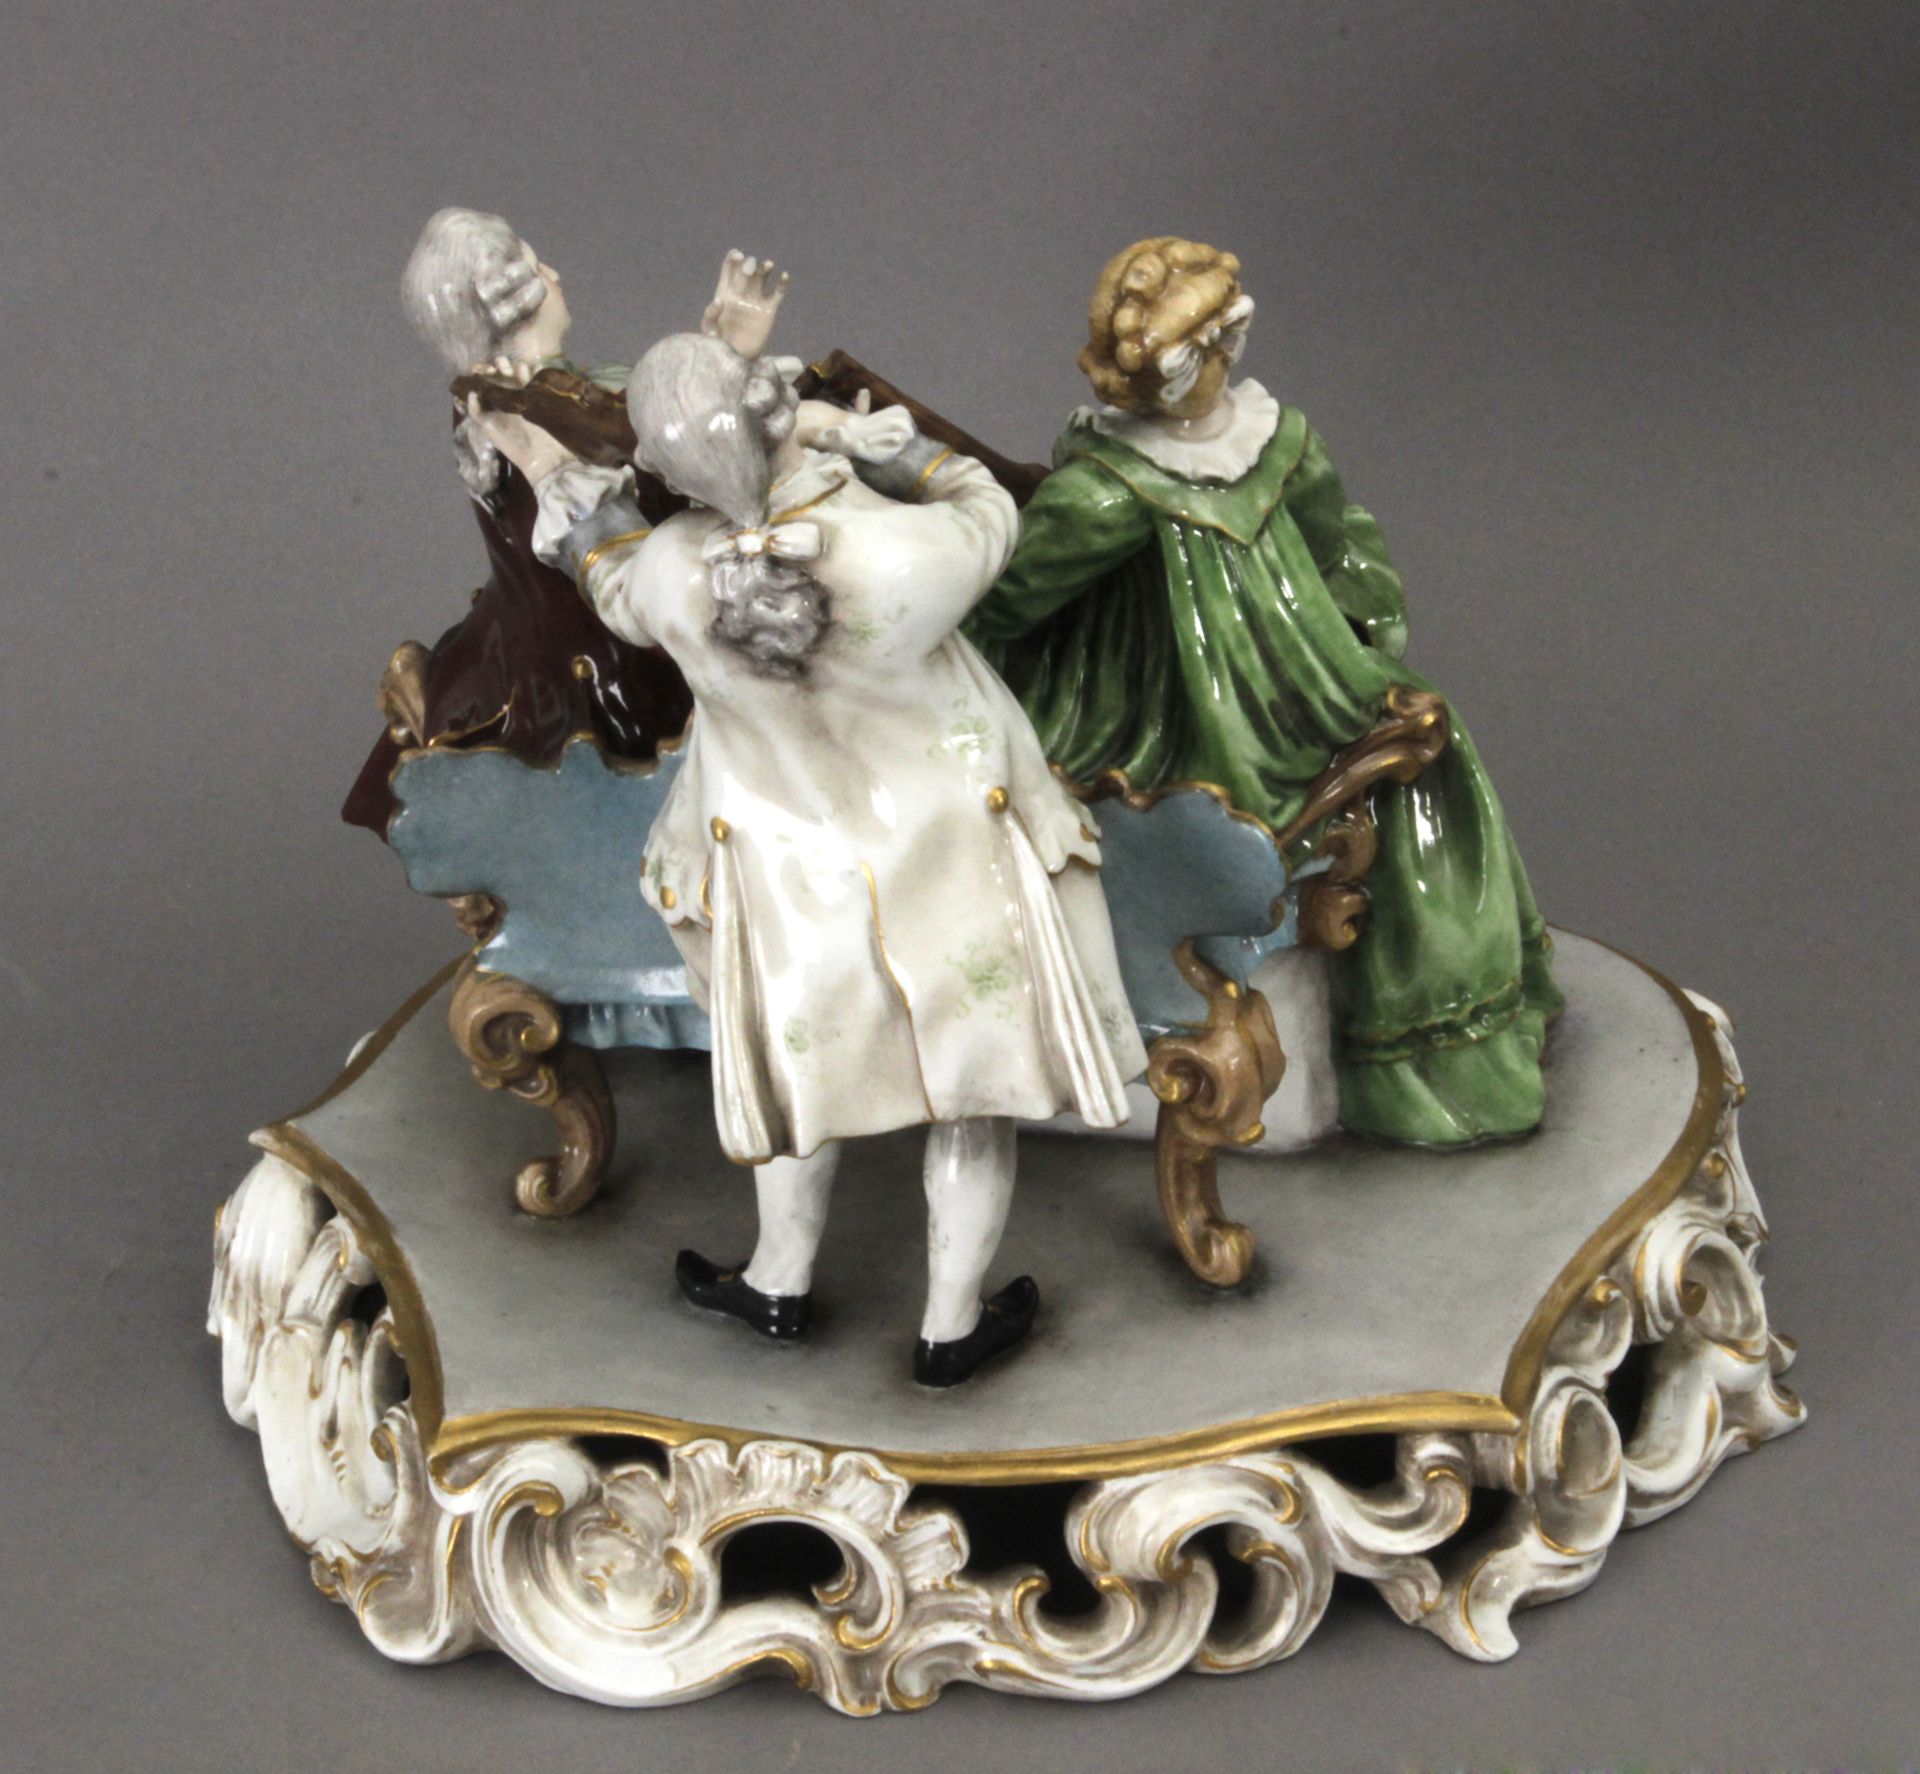 A late 18th century-early 19th century group of figurines in Italian Doccia porcelain